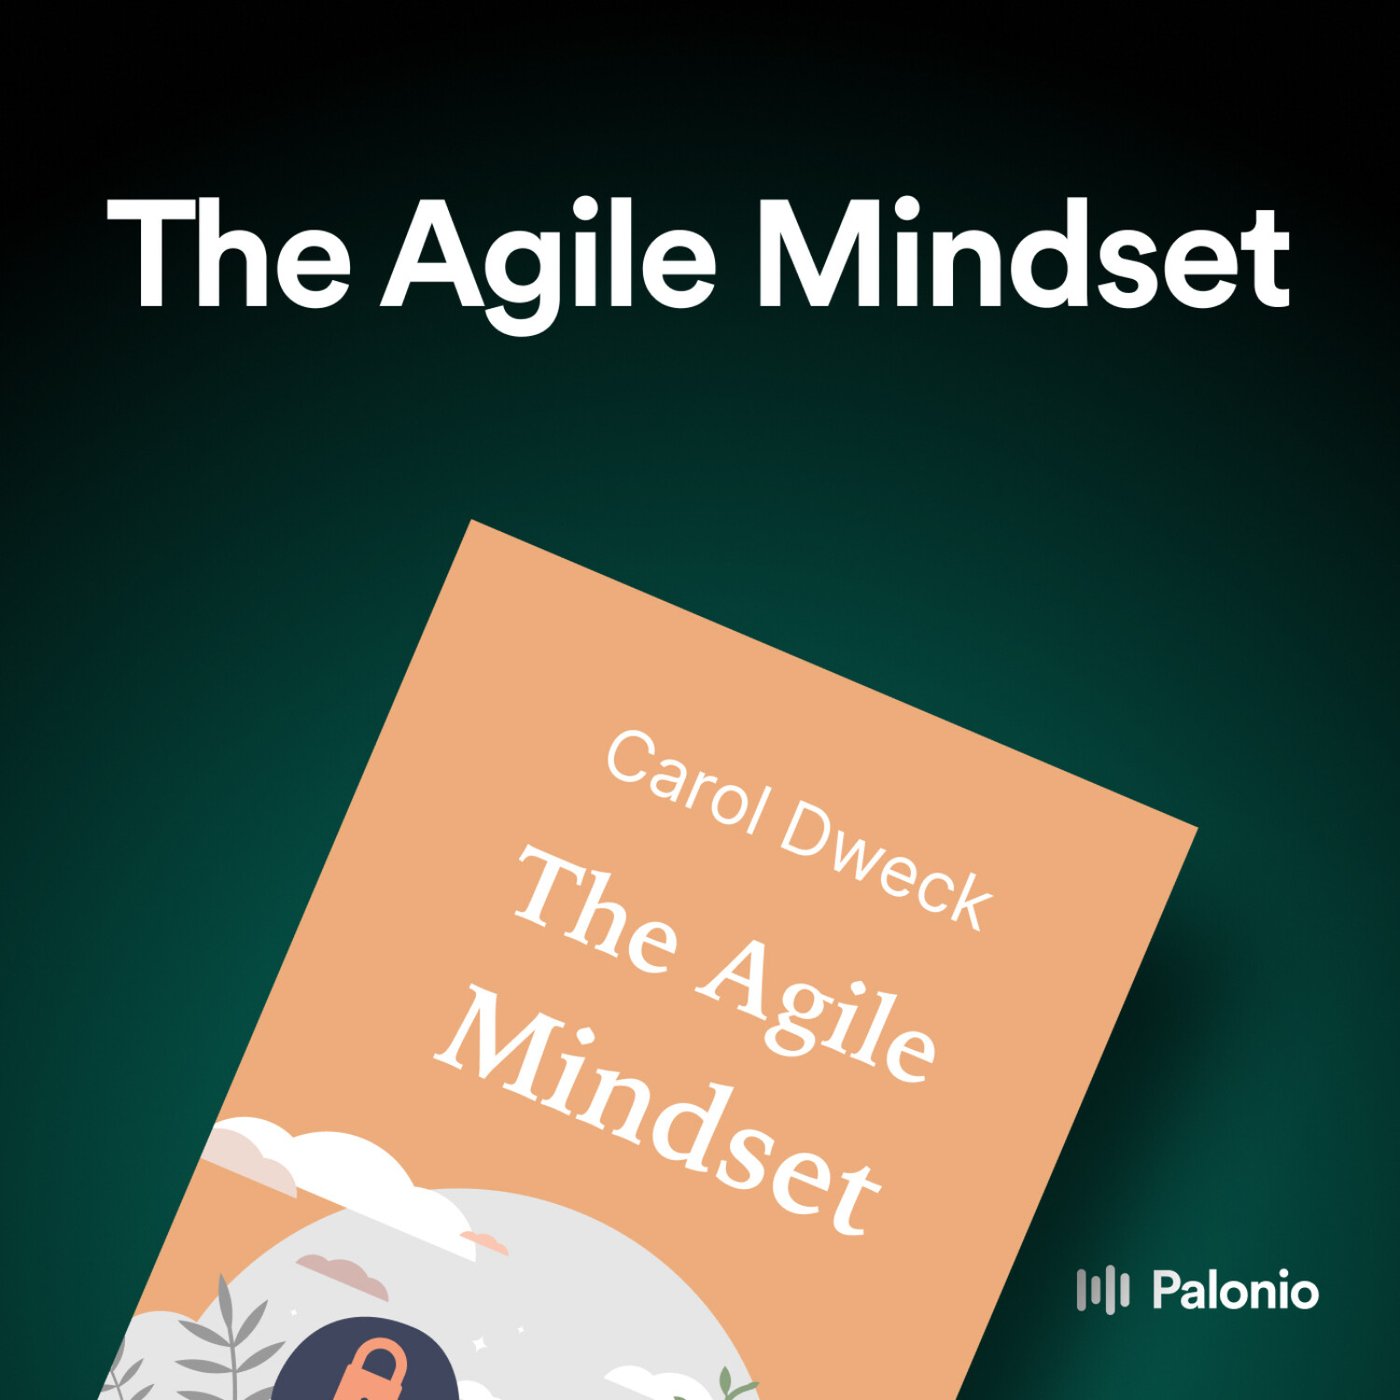 The Agile Mindset by Carol Dweck - One Business Book per Day - Podcast.co